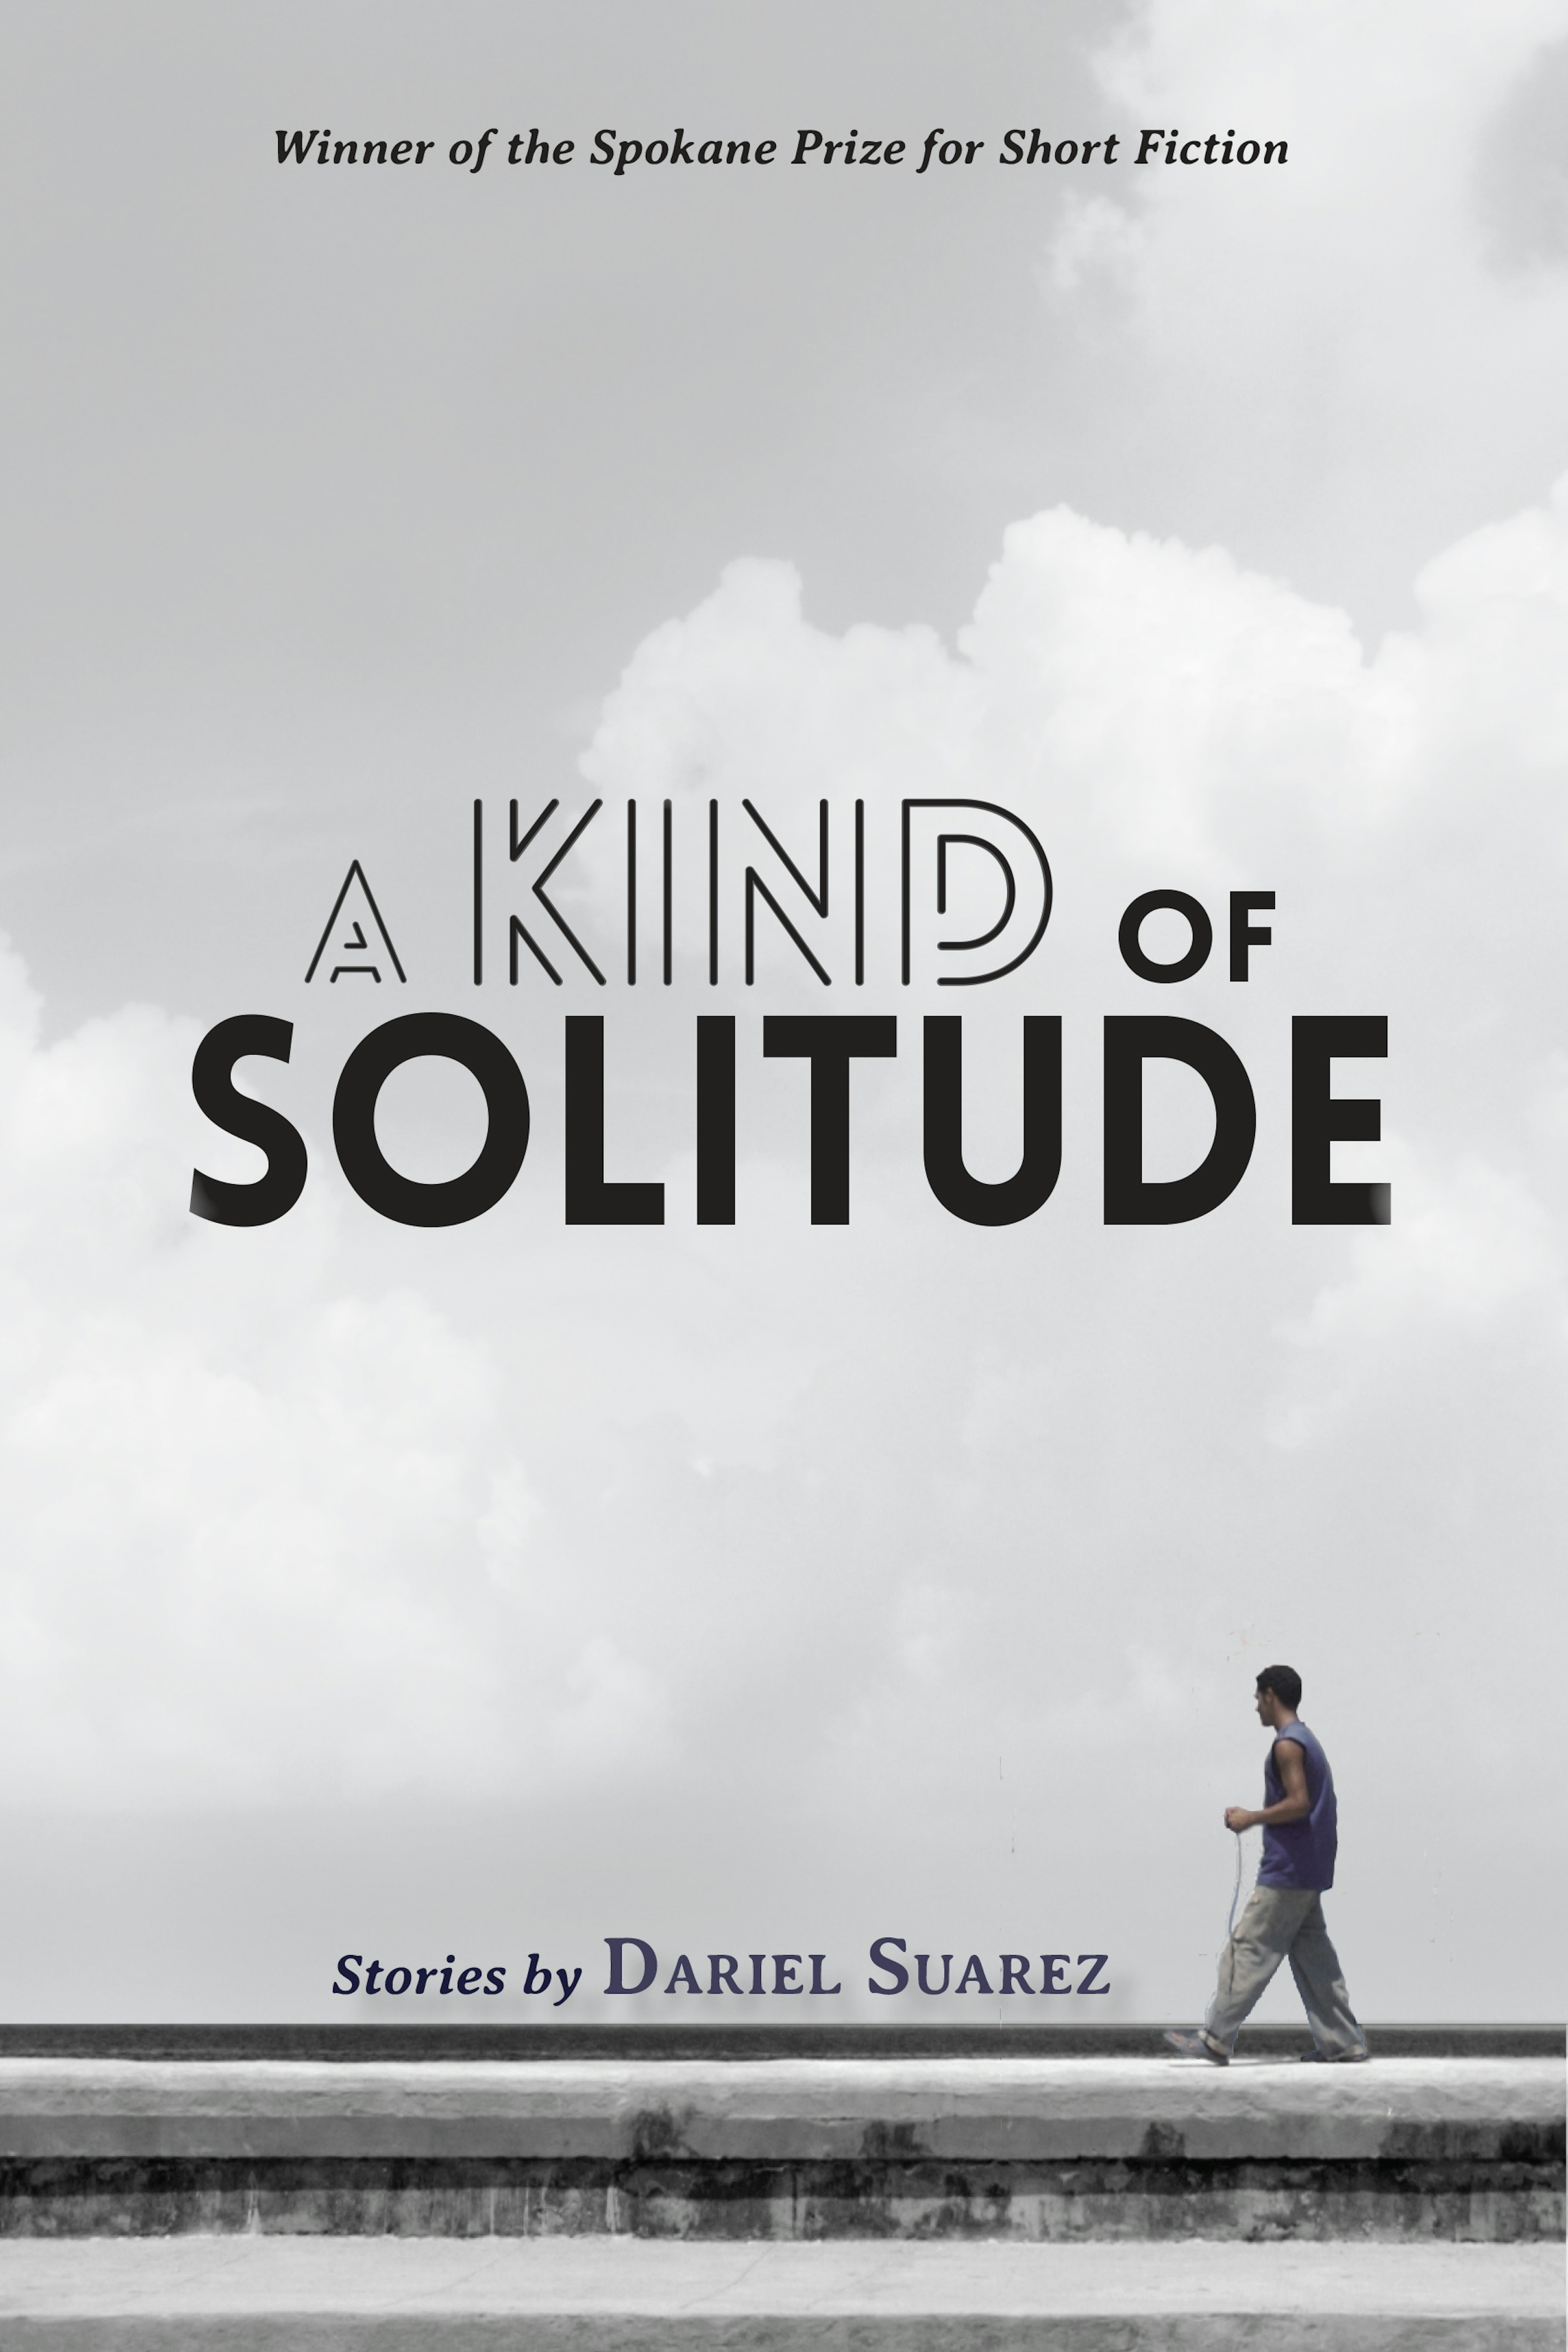 A Kind of Solitude